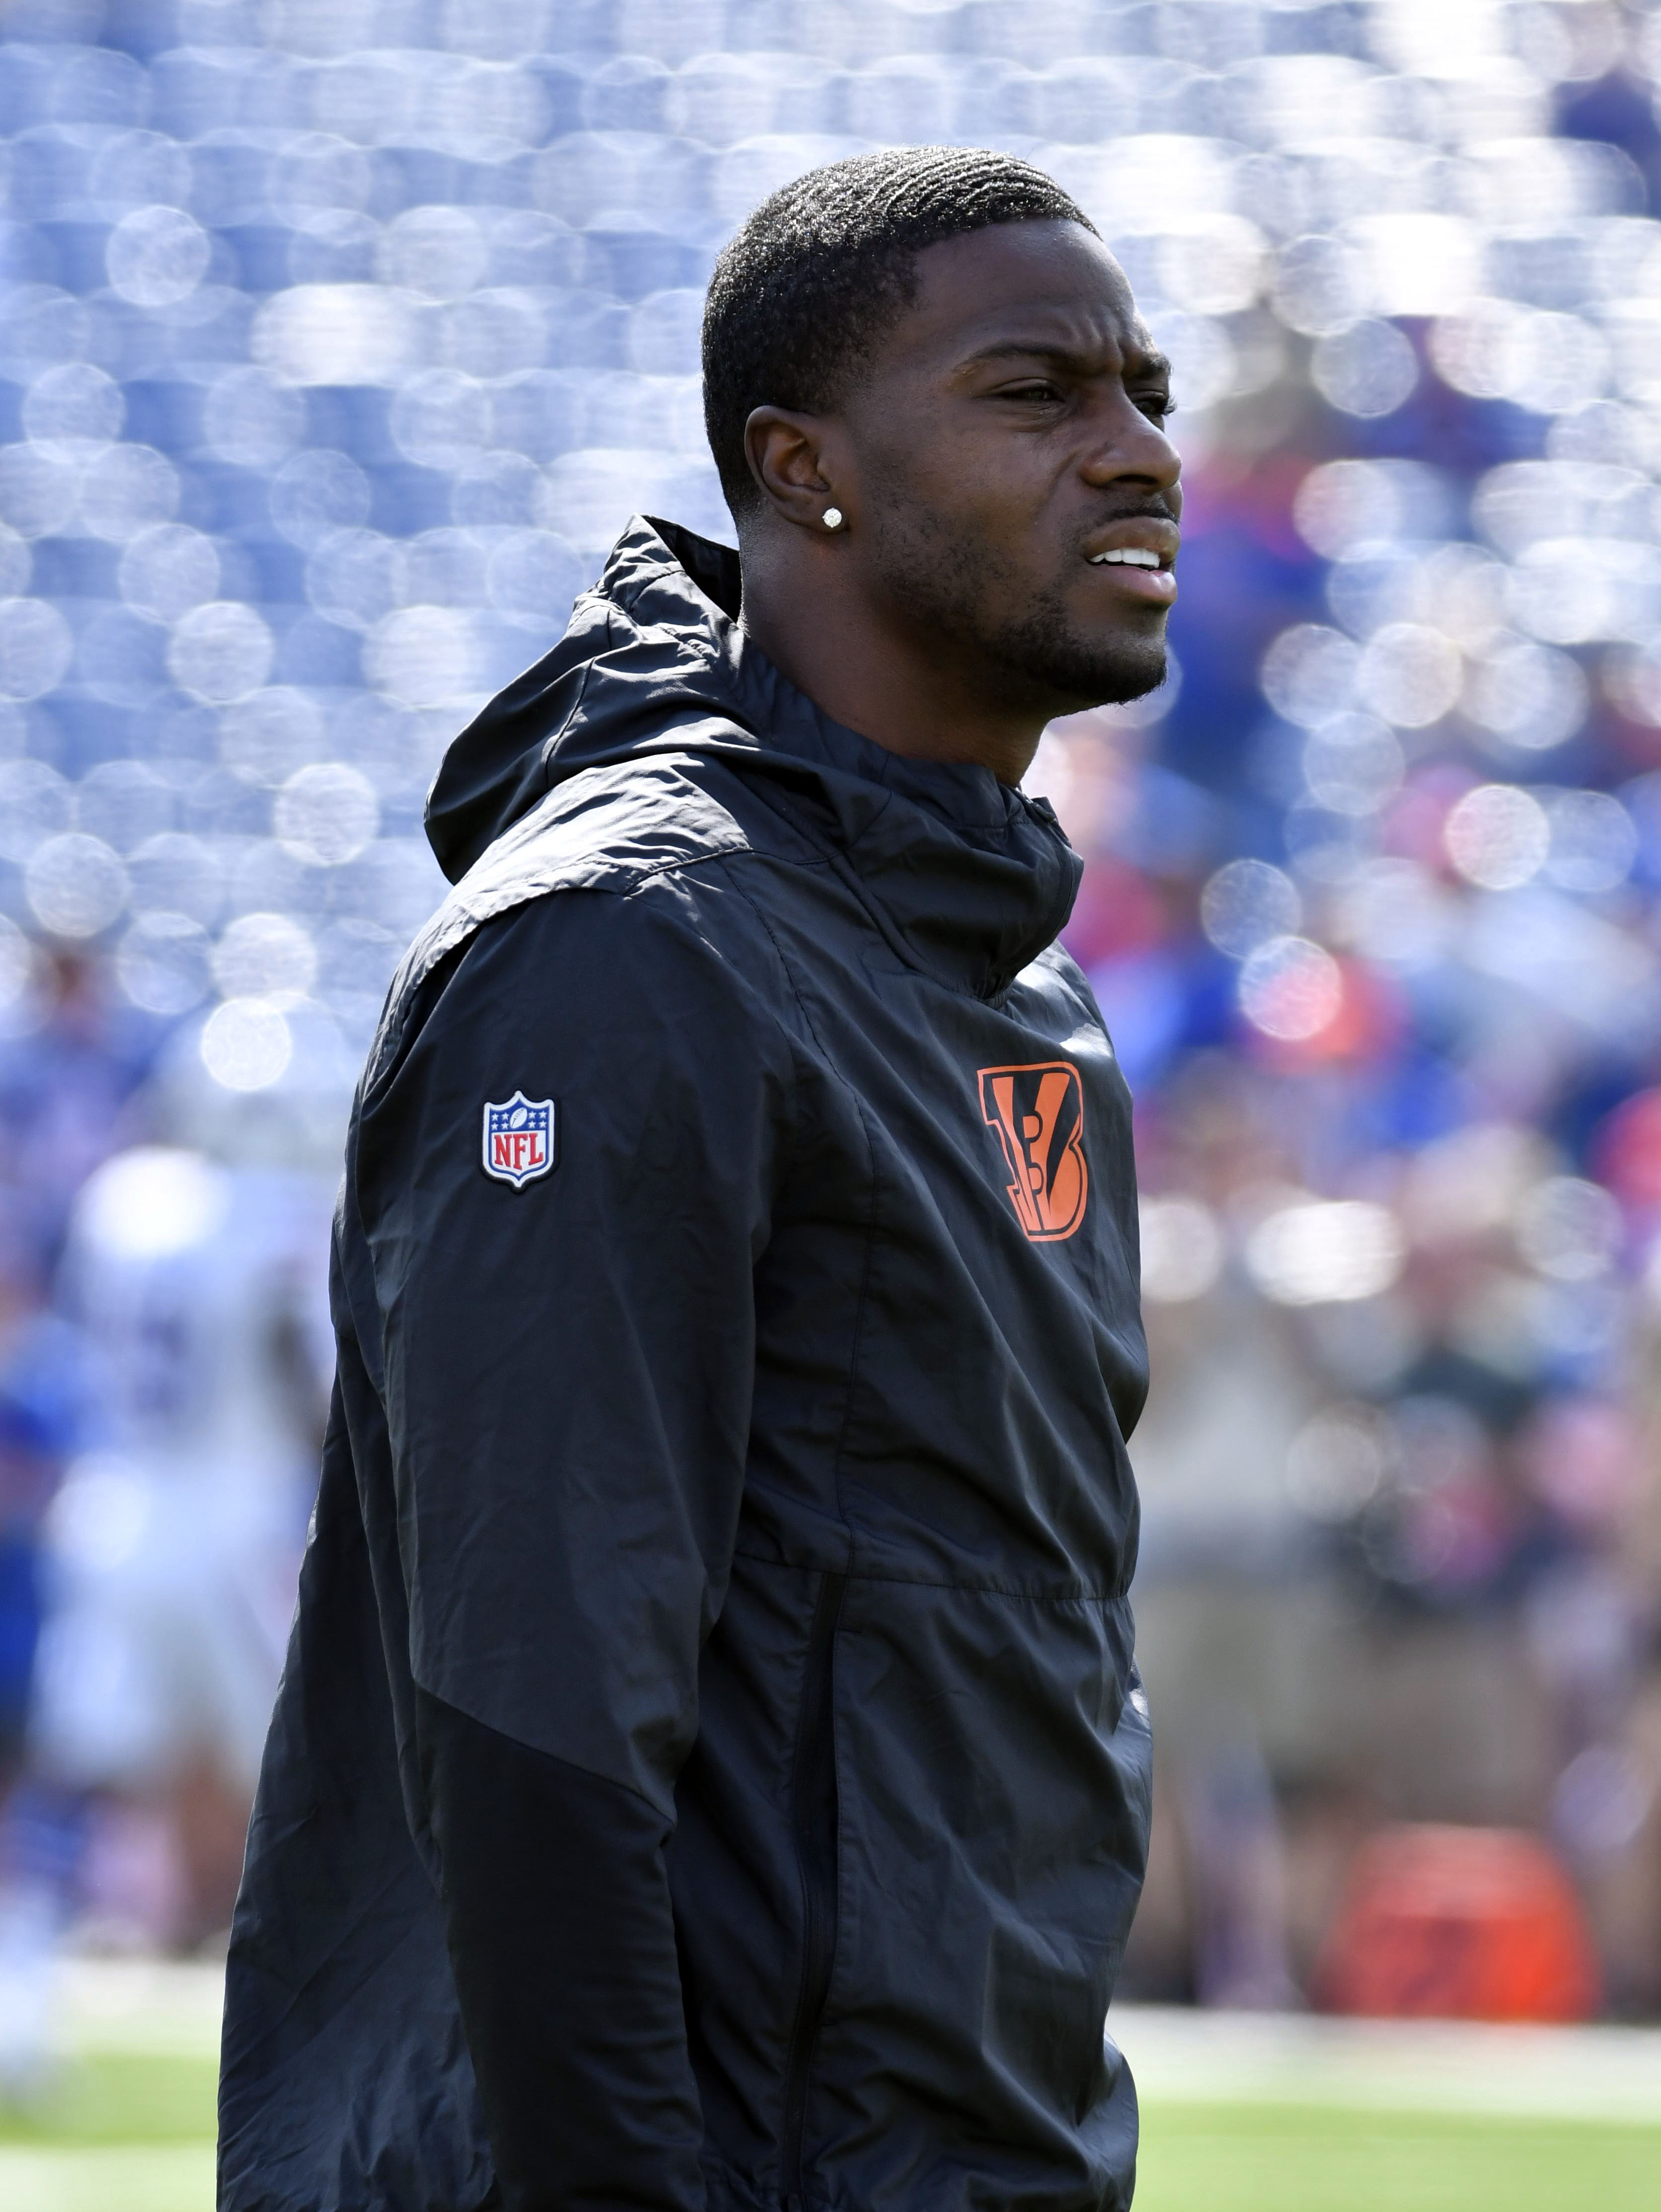 Bengals, A.J. Green Discussing Extension